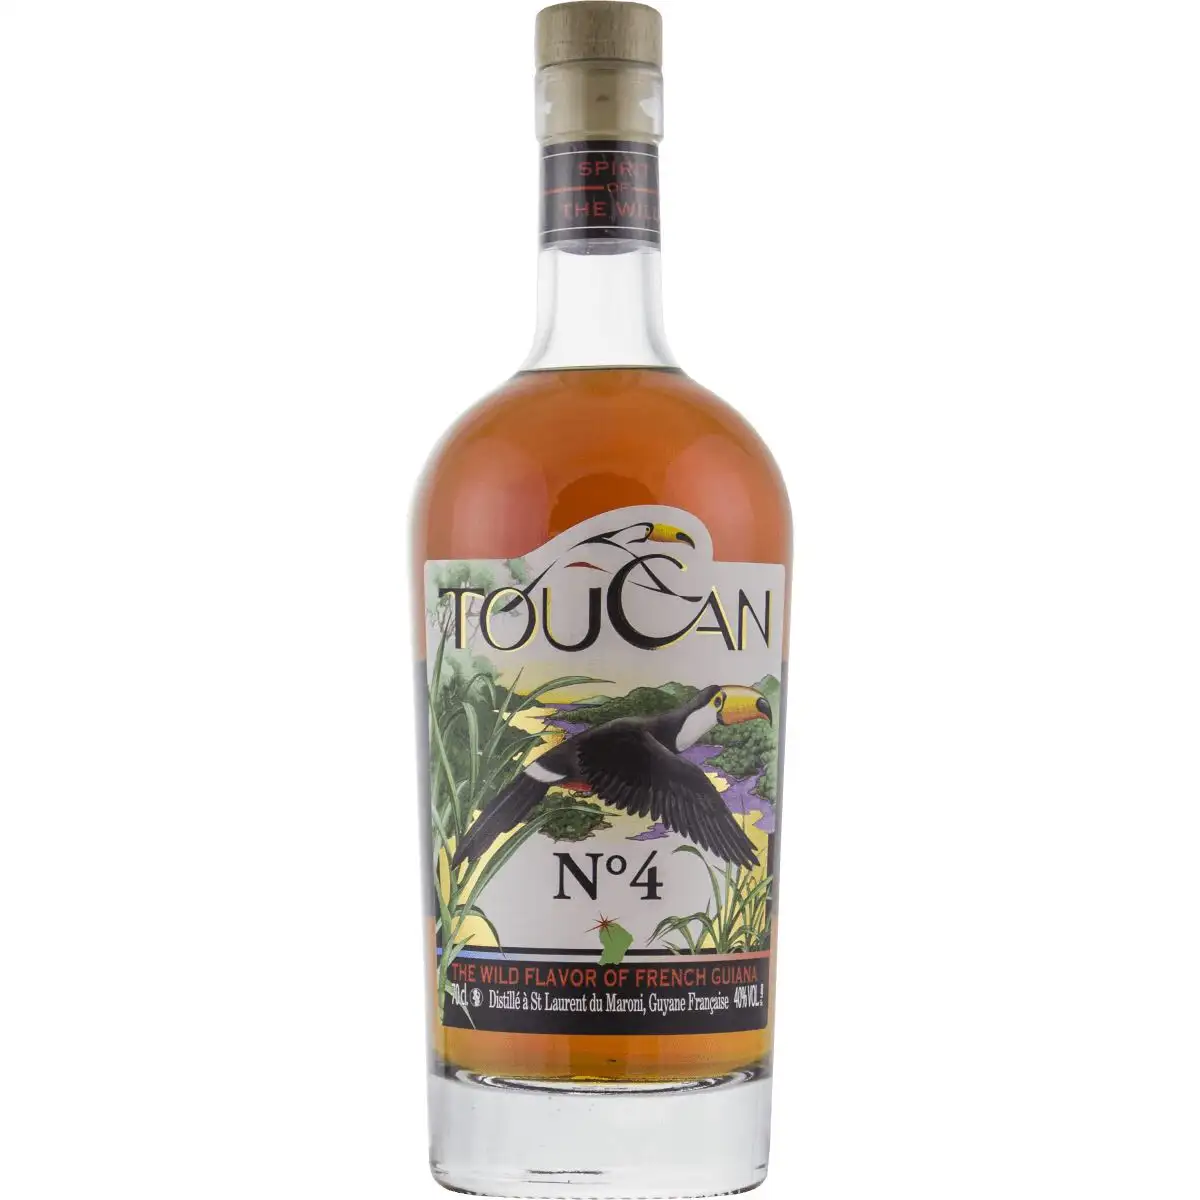 Image of the front of the bottle of the rum No. 4